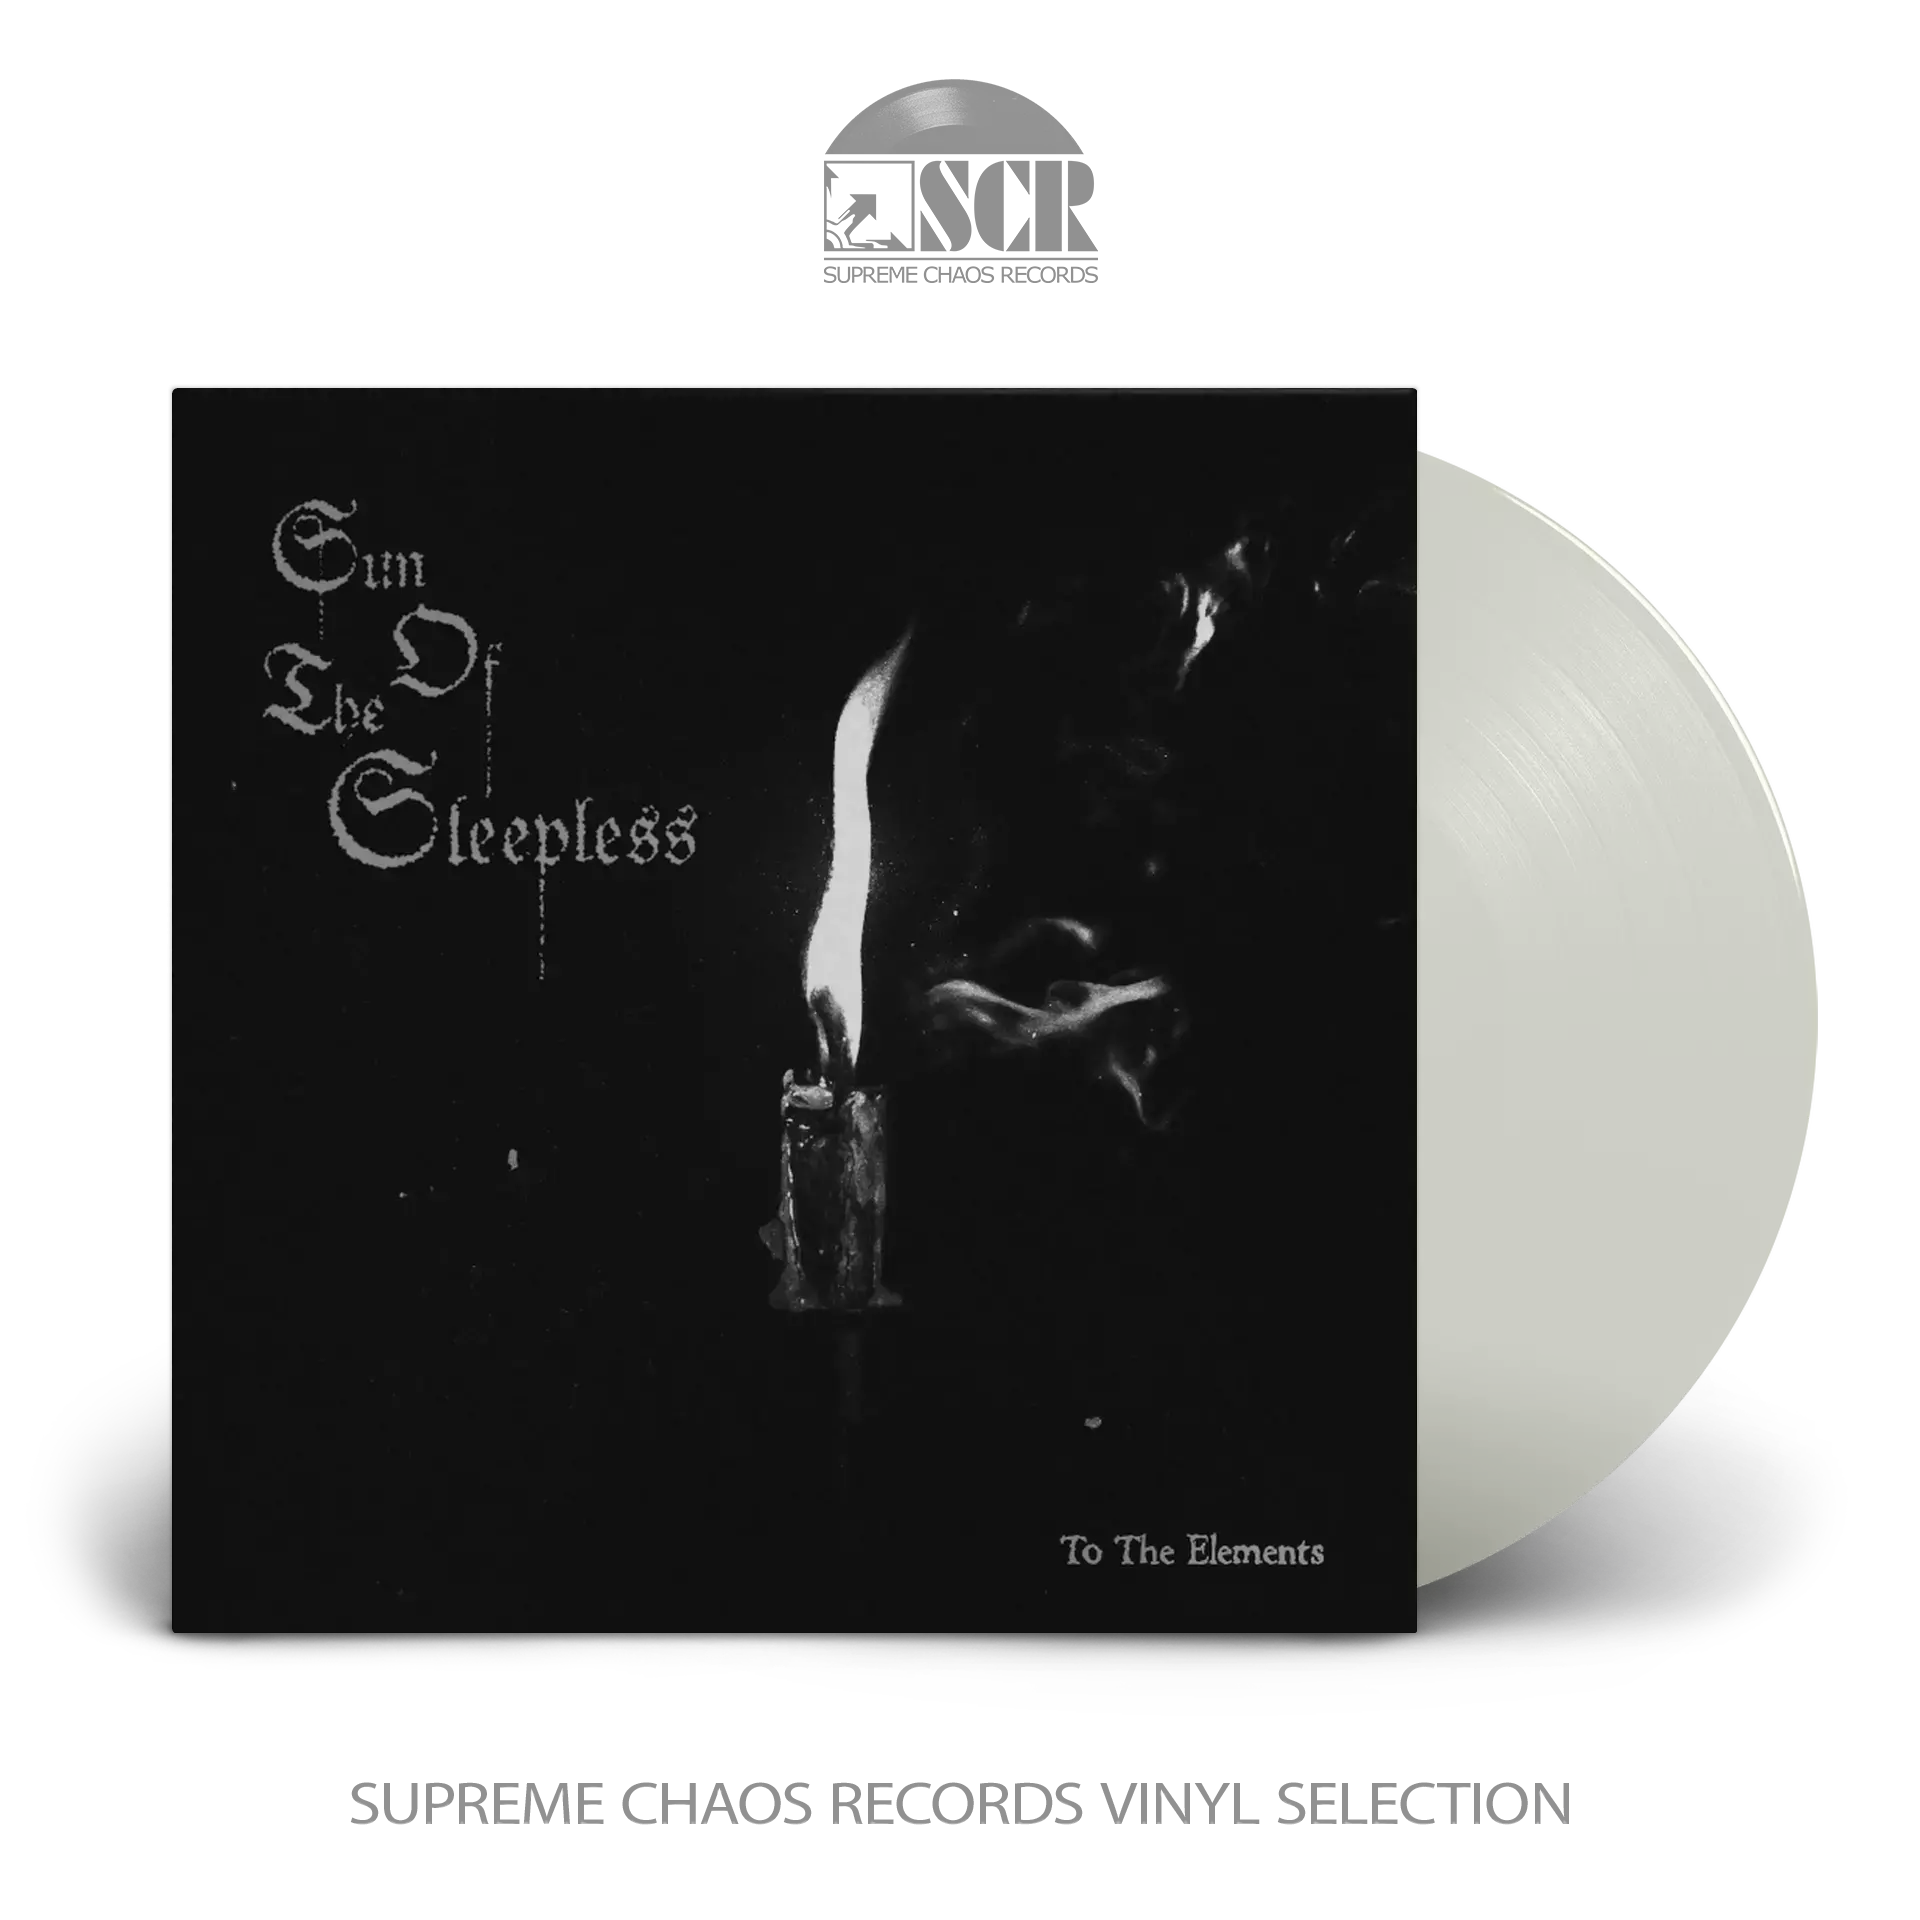 SUN OF THE SLEEPLESS - To The Elements [CLEAR LP]